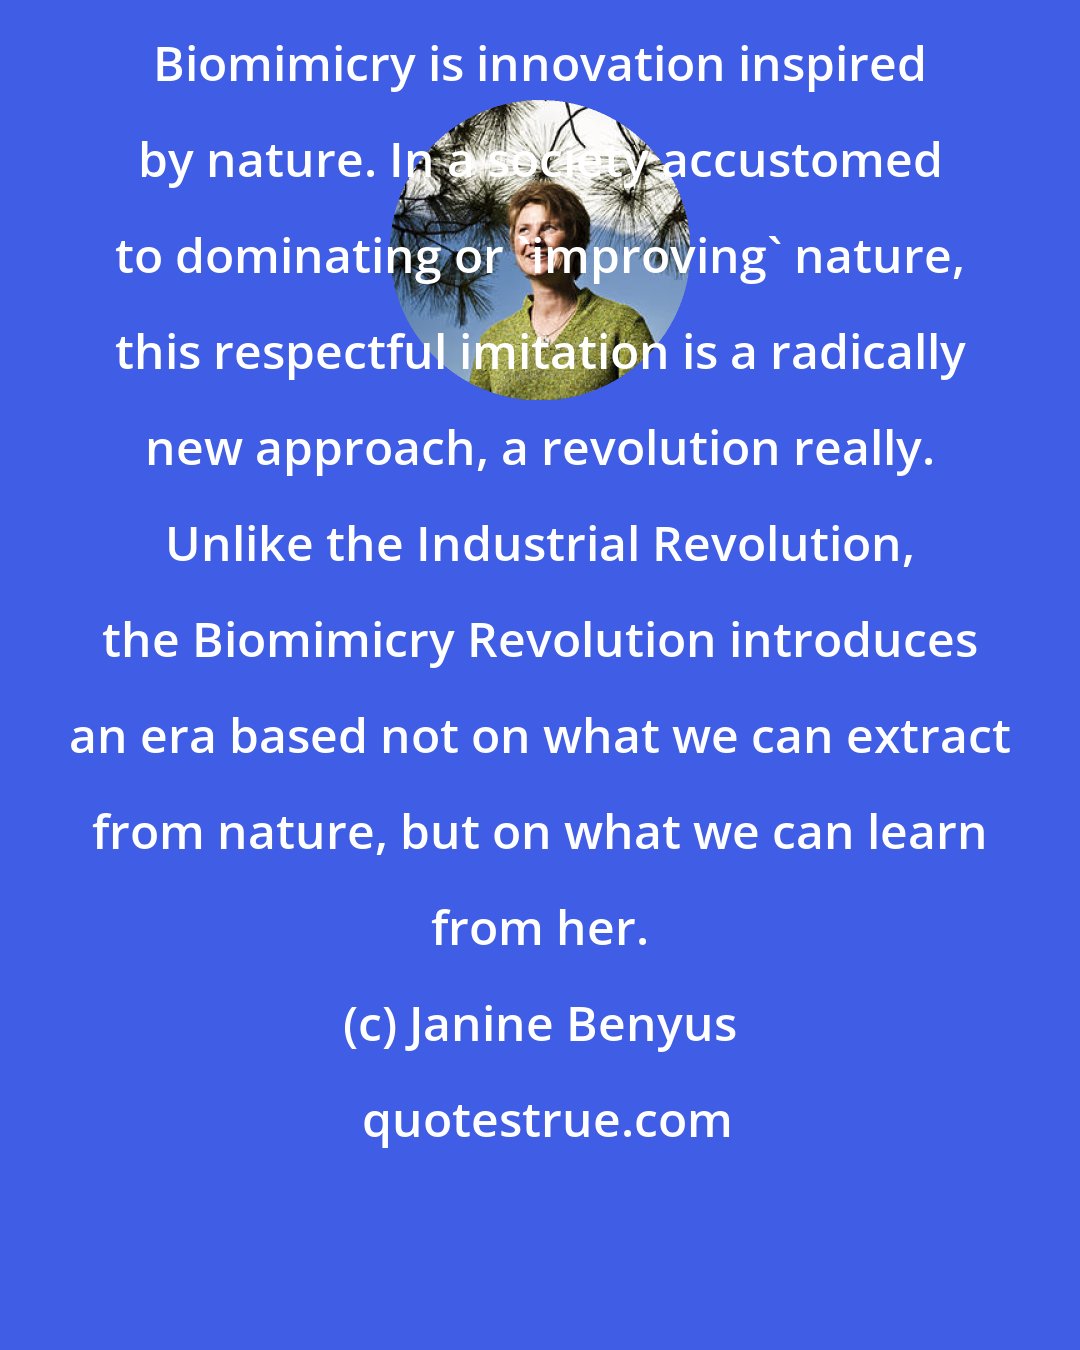 Janine Benyus: Biomimicry is innovation inspired by nature. In a society accustomed to dominating or 'improving' nature, this respectful imitation is a radically new approach, a revolution really. Unlike the Industrial Revolution, the Biomimicry Revolution introduces an era based not on what we can extract from nature, but on what we can learn from her.